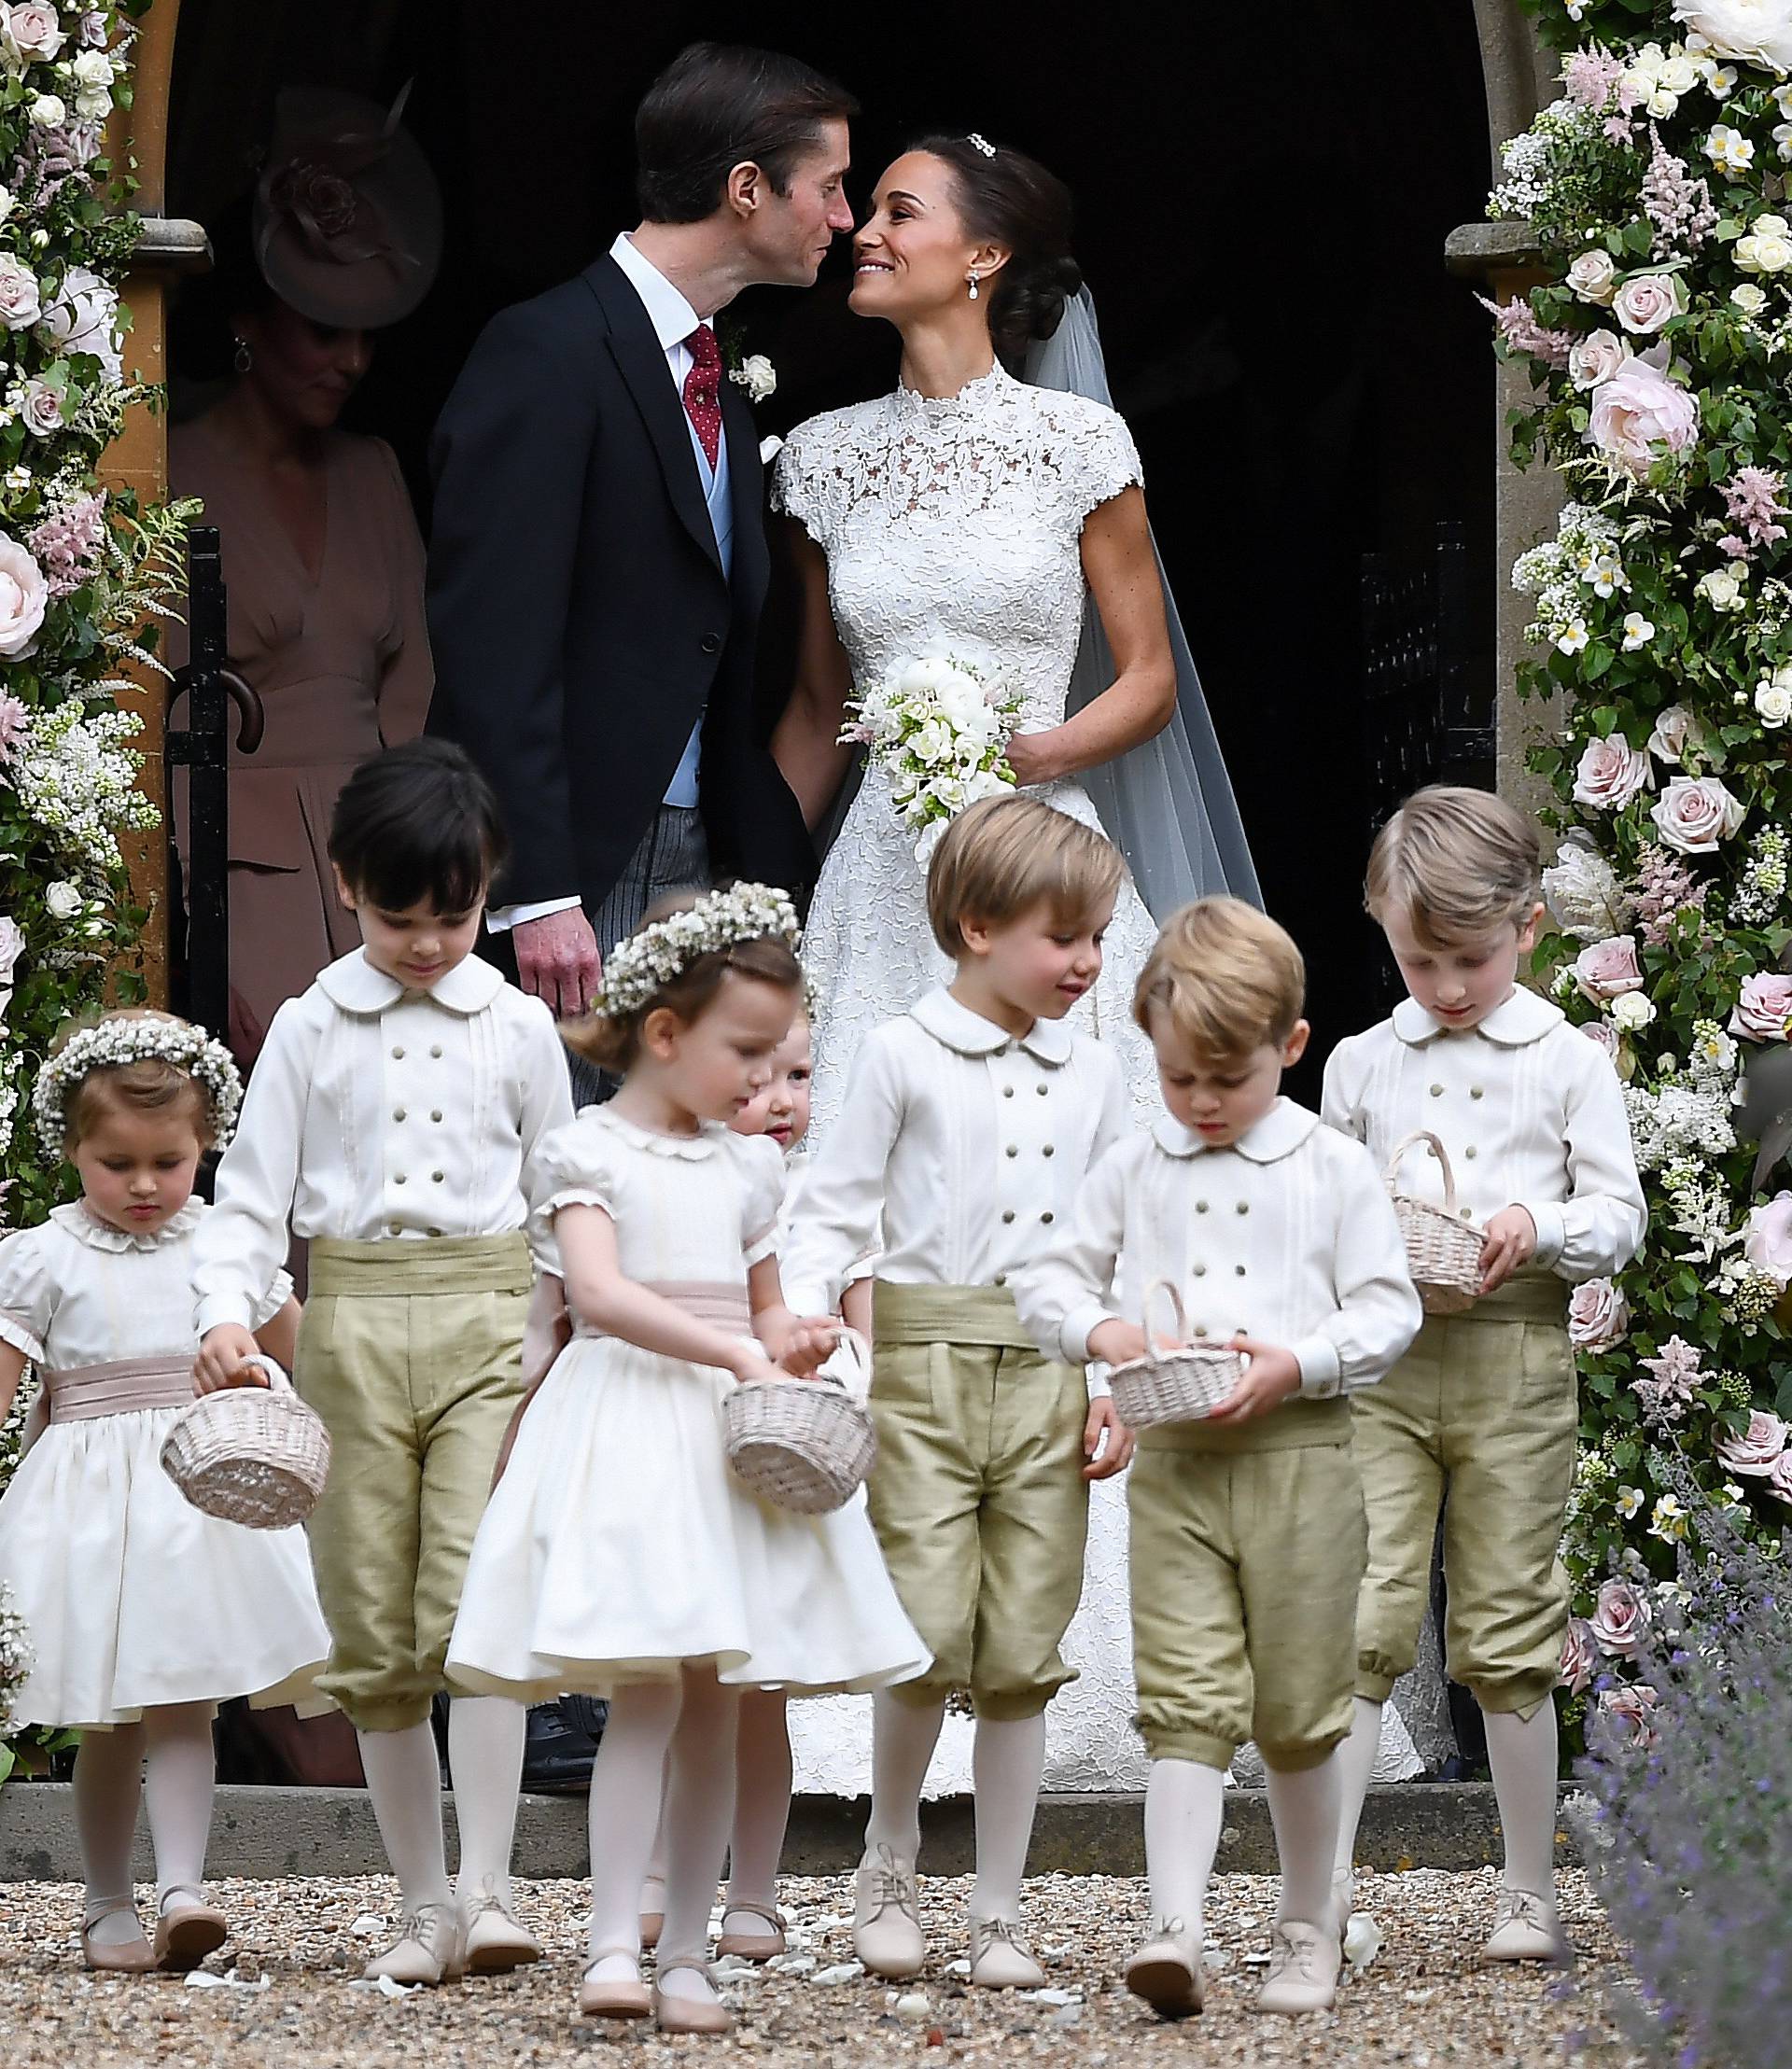 Pippa Middleton kisses her new husband James Matthews, following their wedding ceremony at St Mark's Church in Englefield